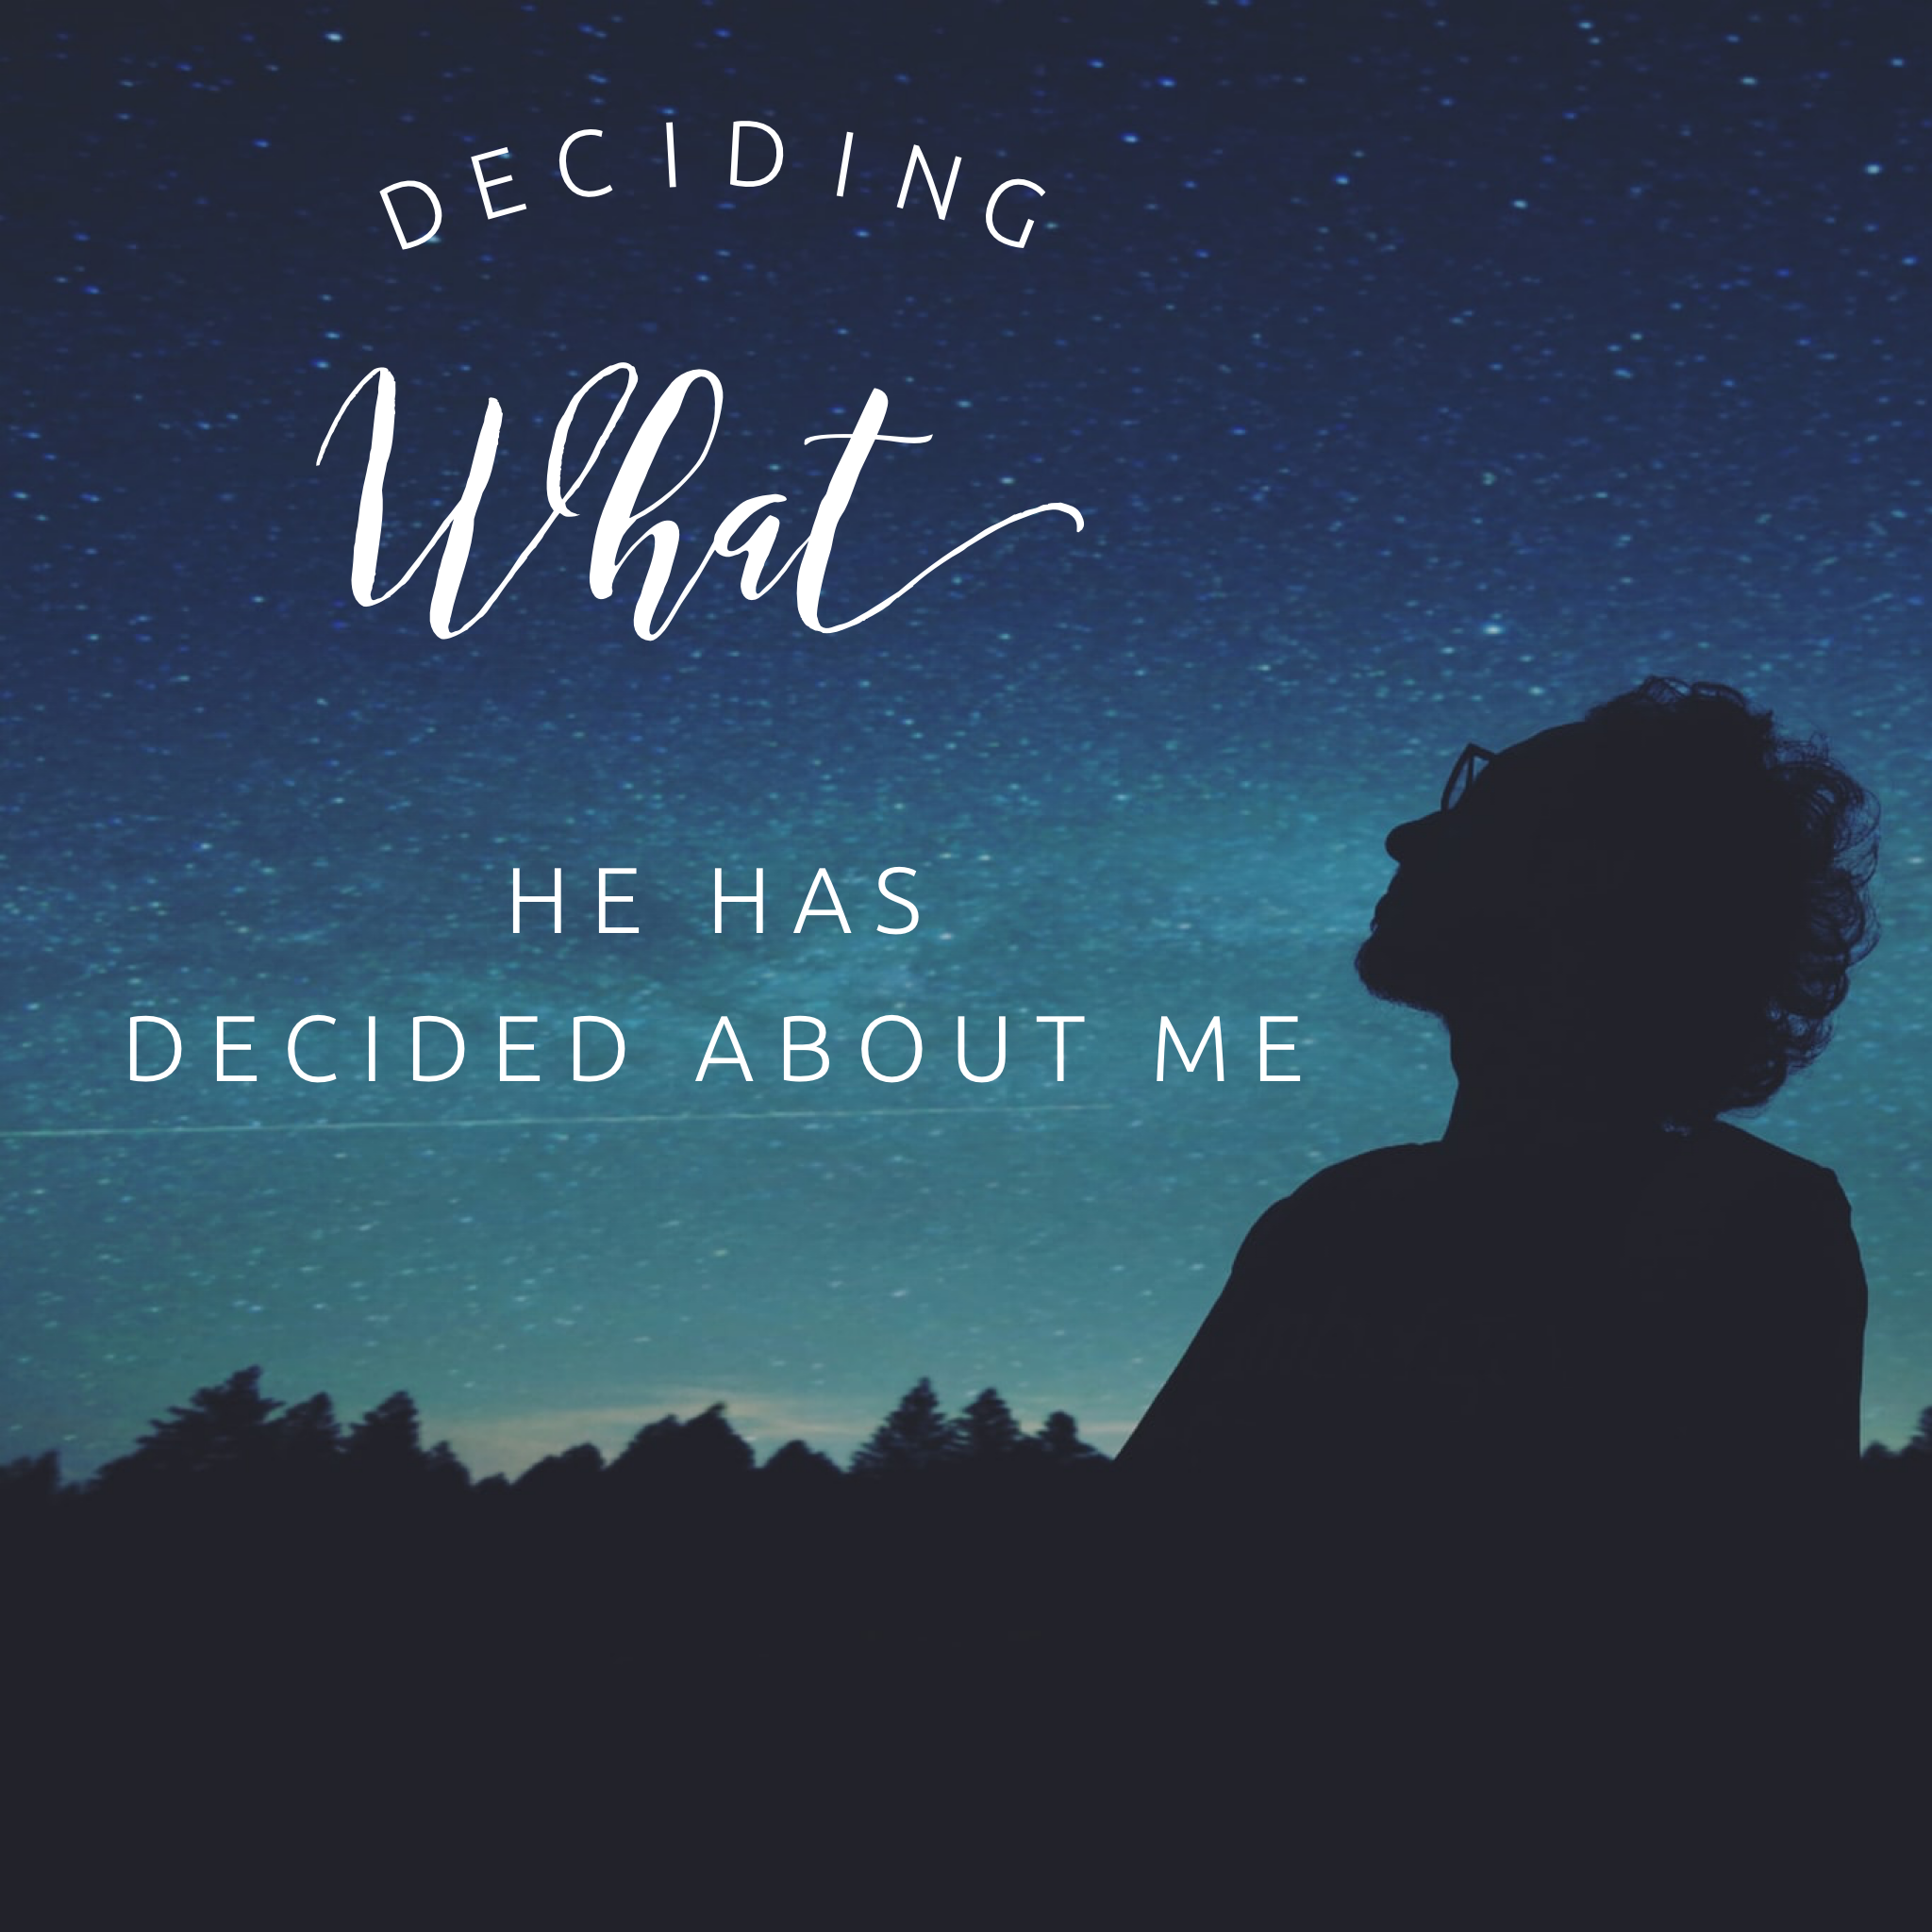 Deciding What He has Decided About Me - 9/6/20